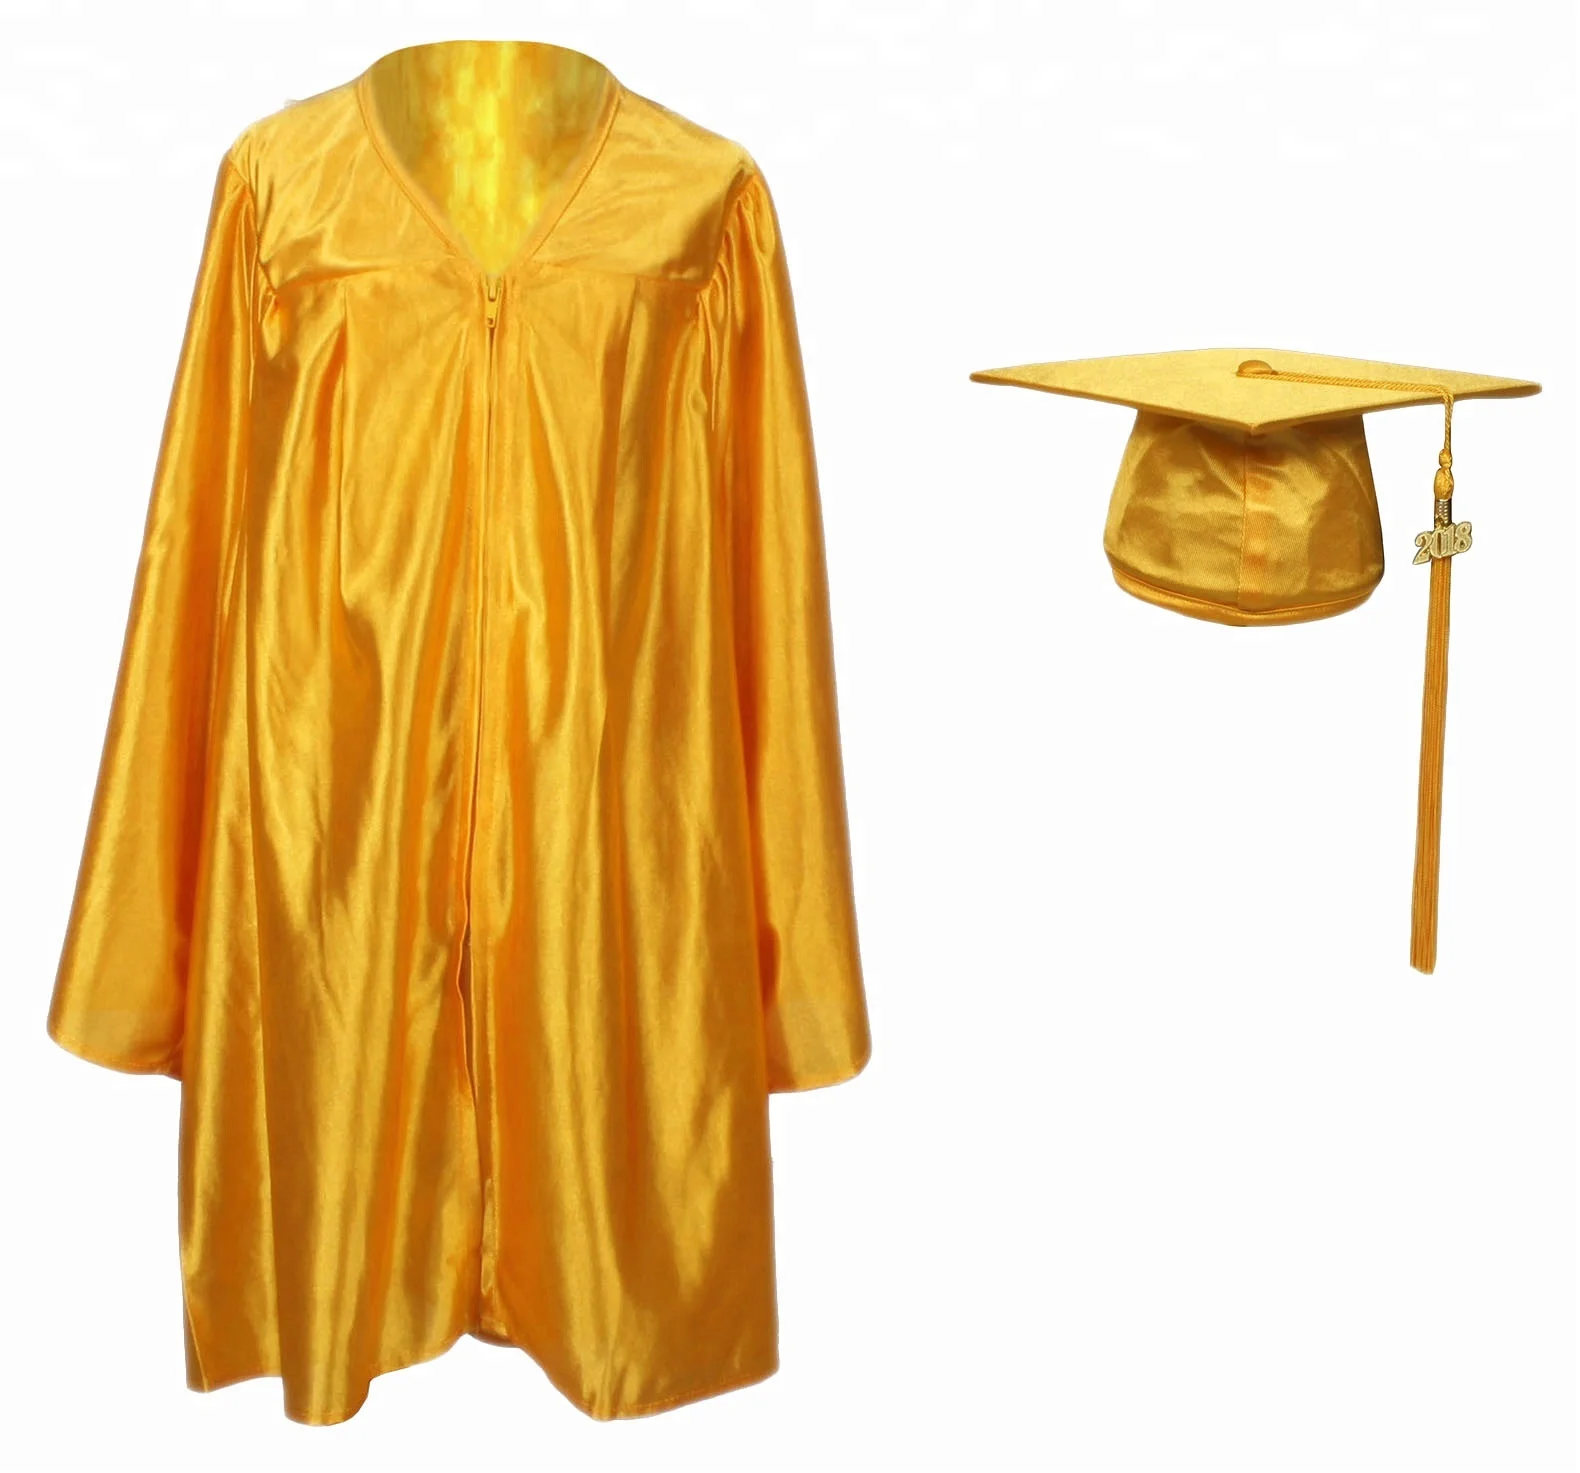 

Baby Graduation Cap and Gown for Kindergarten & Primary School Kids- Shiny Gold, All colors available